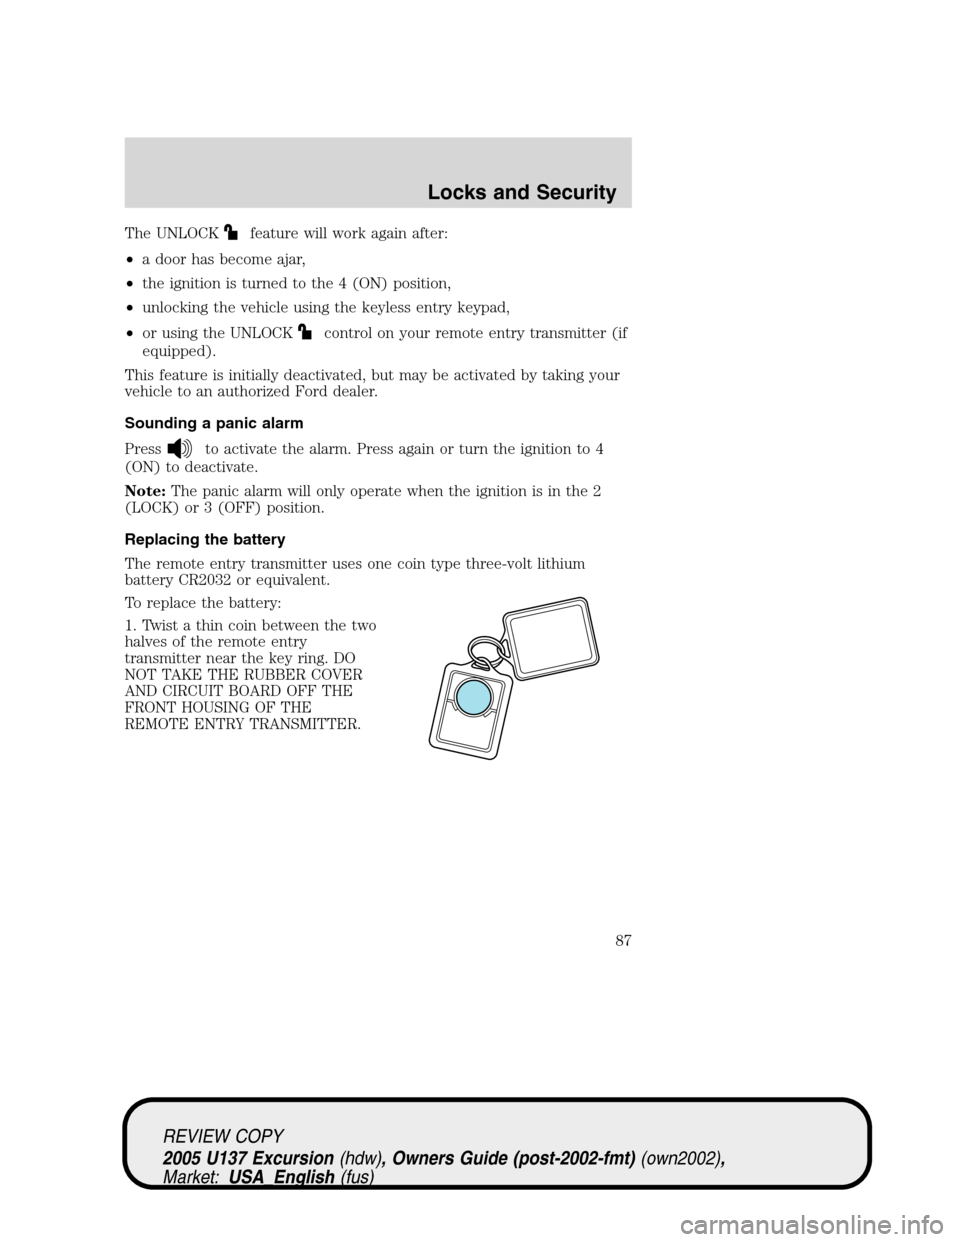 FORD EXCURSION 2005 1.G Owners Manual The UNLOCKfeature will work again after:
•a door has become ajar,
•the ignition is turned to the 4 (ON) position,
•unlocking the vehicle using the keyless entry keypad,
•or using the UNLOCK
co